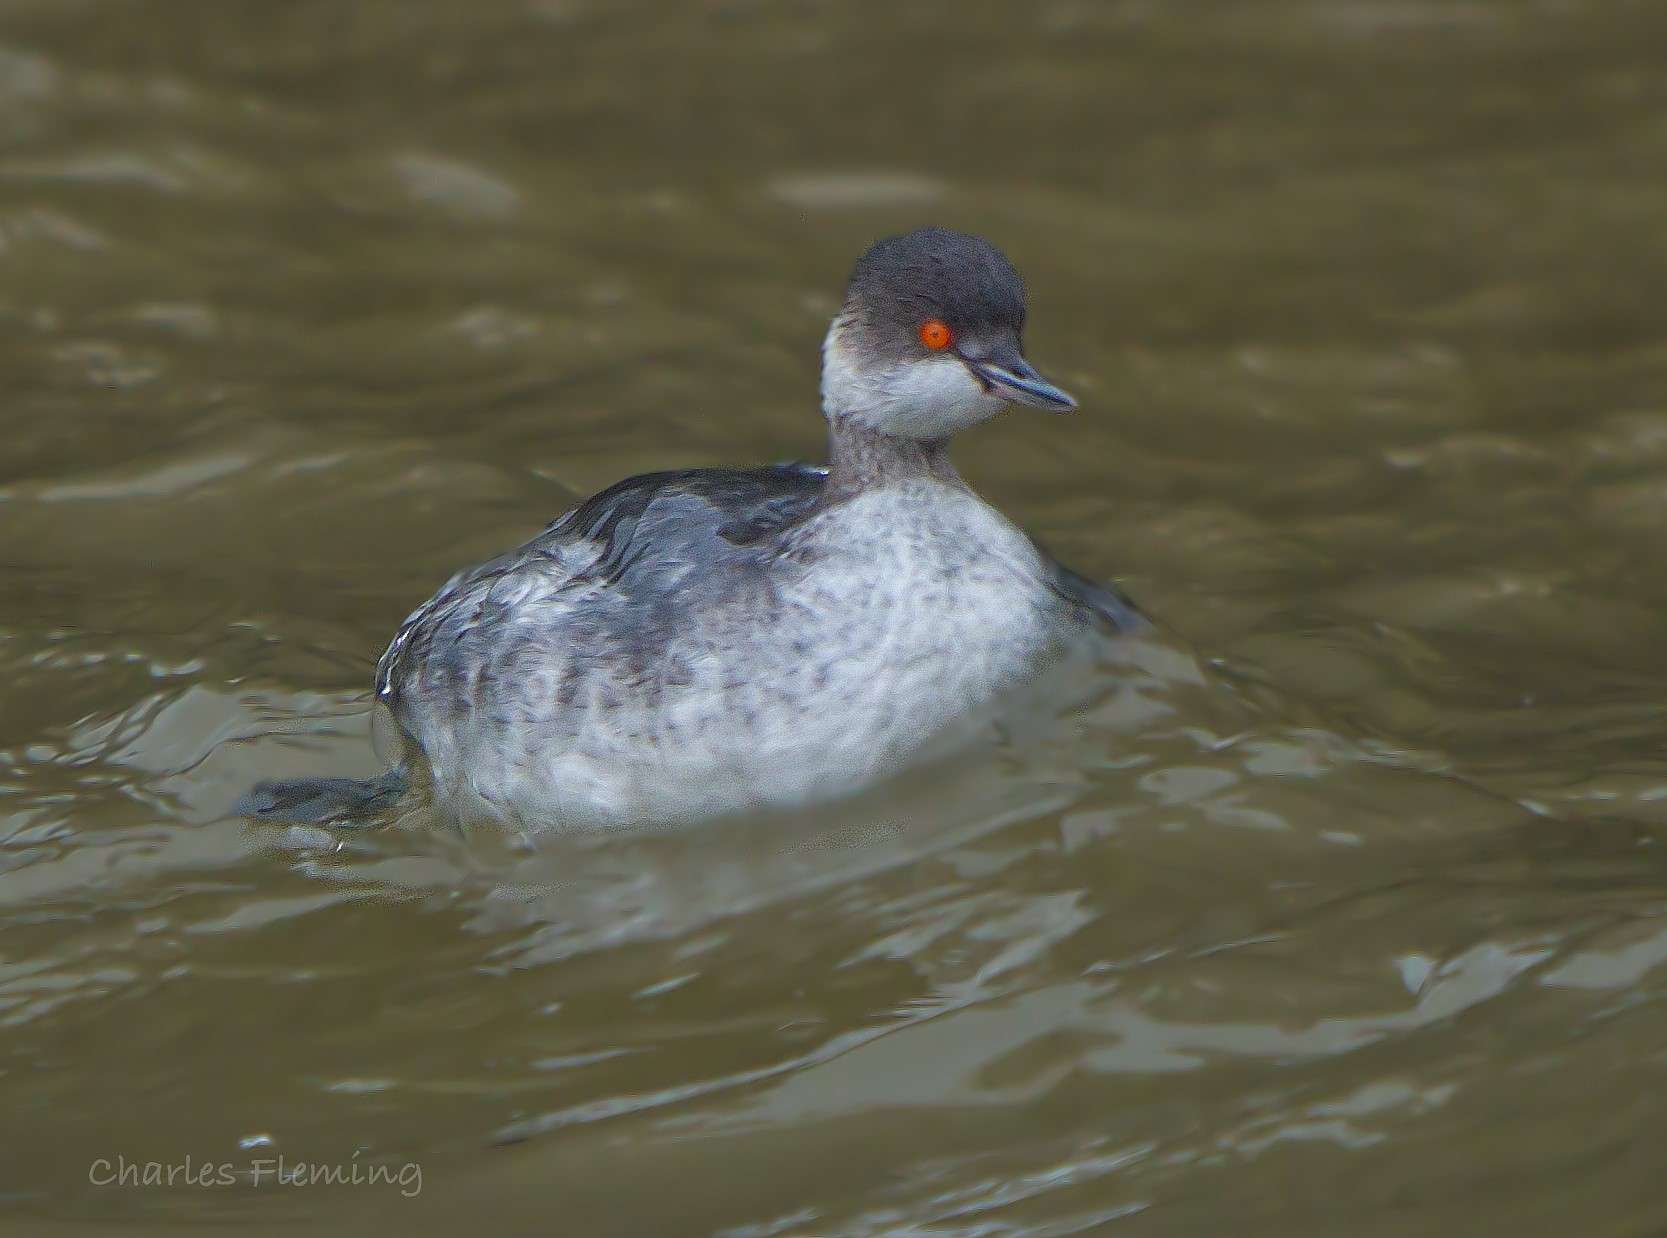 Black-necked Grebe by Charlie Fleming at Turf